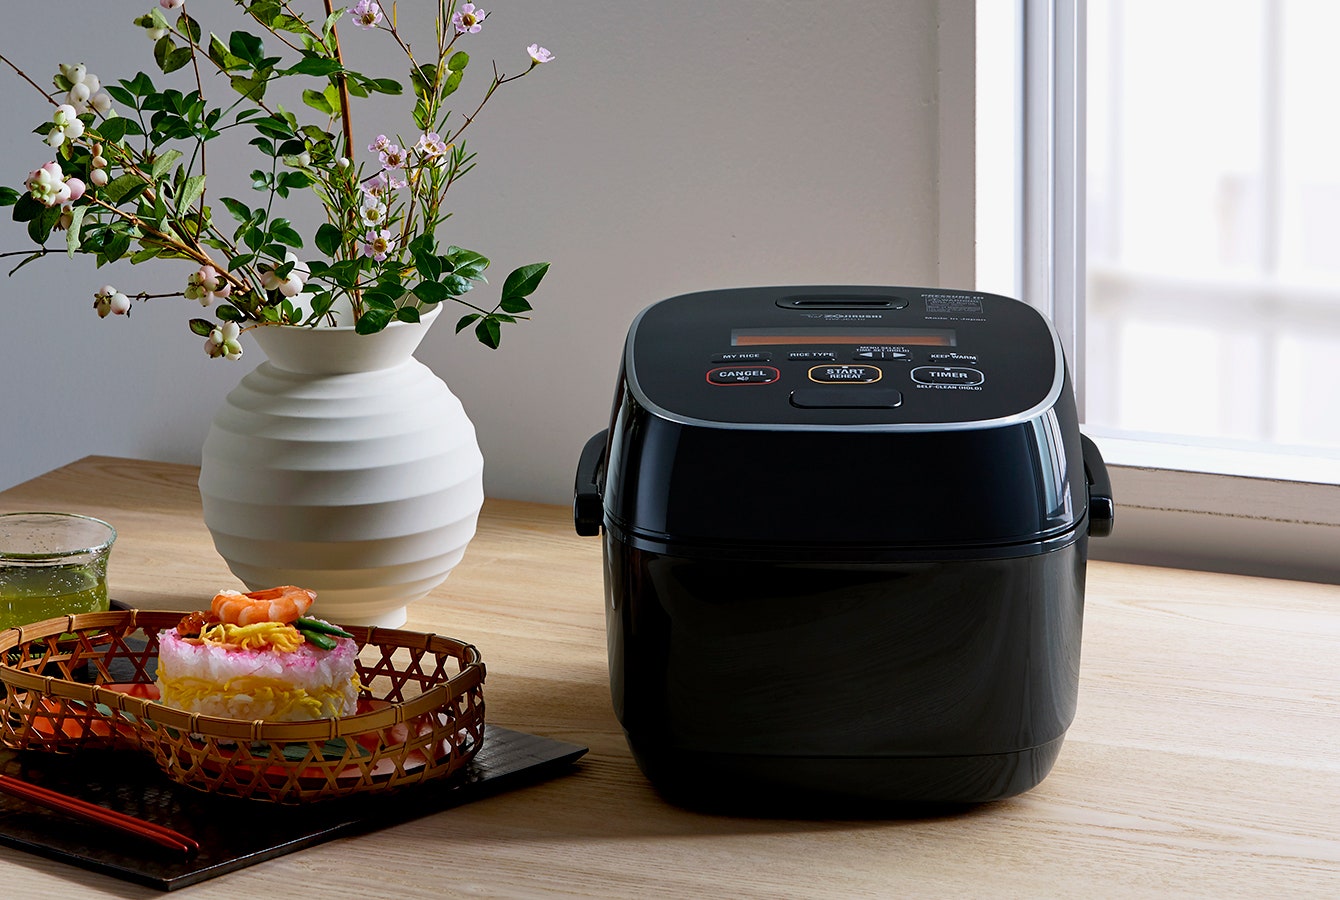 Zojirushi Rice Cooker on a kitchen table next to a plant and food items